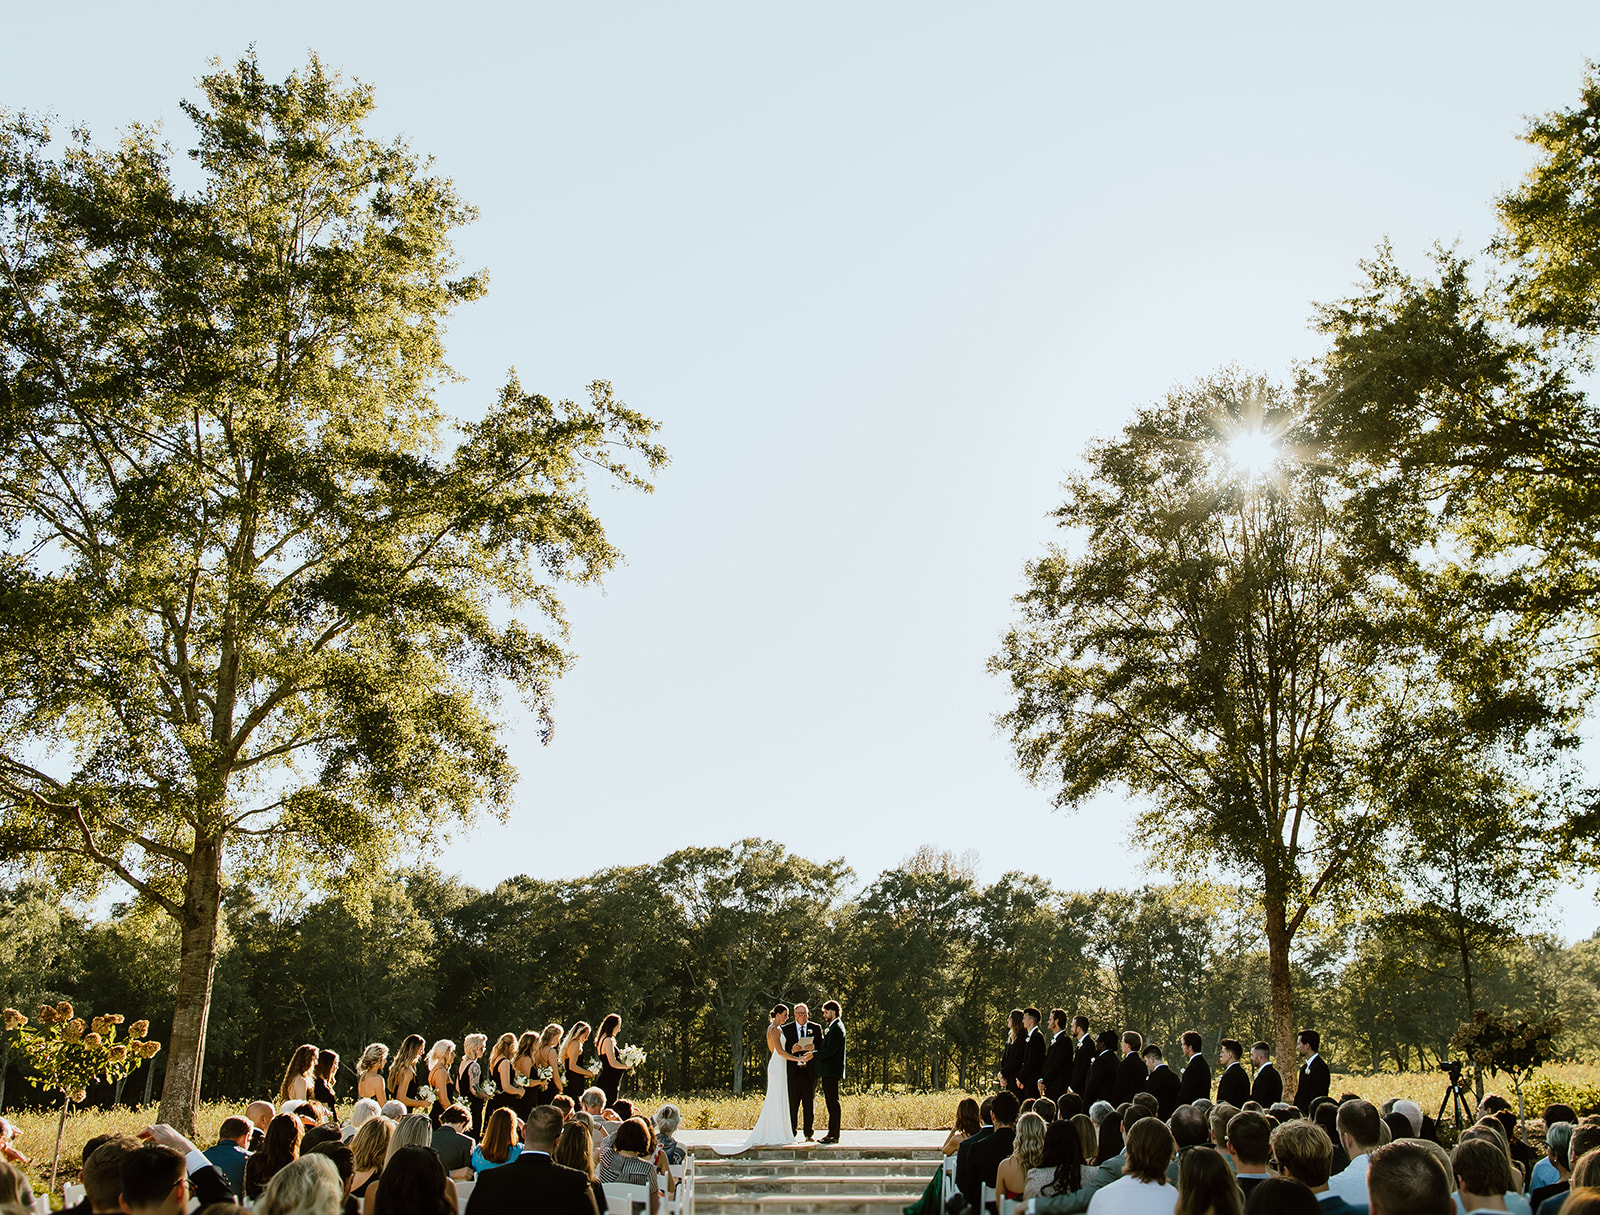 Summer wedding at Hadden Estate in Georgia by Emily Battles Photography